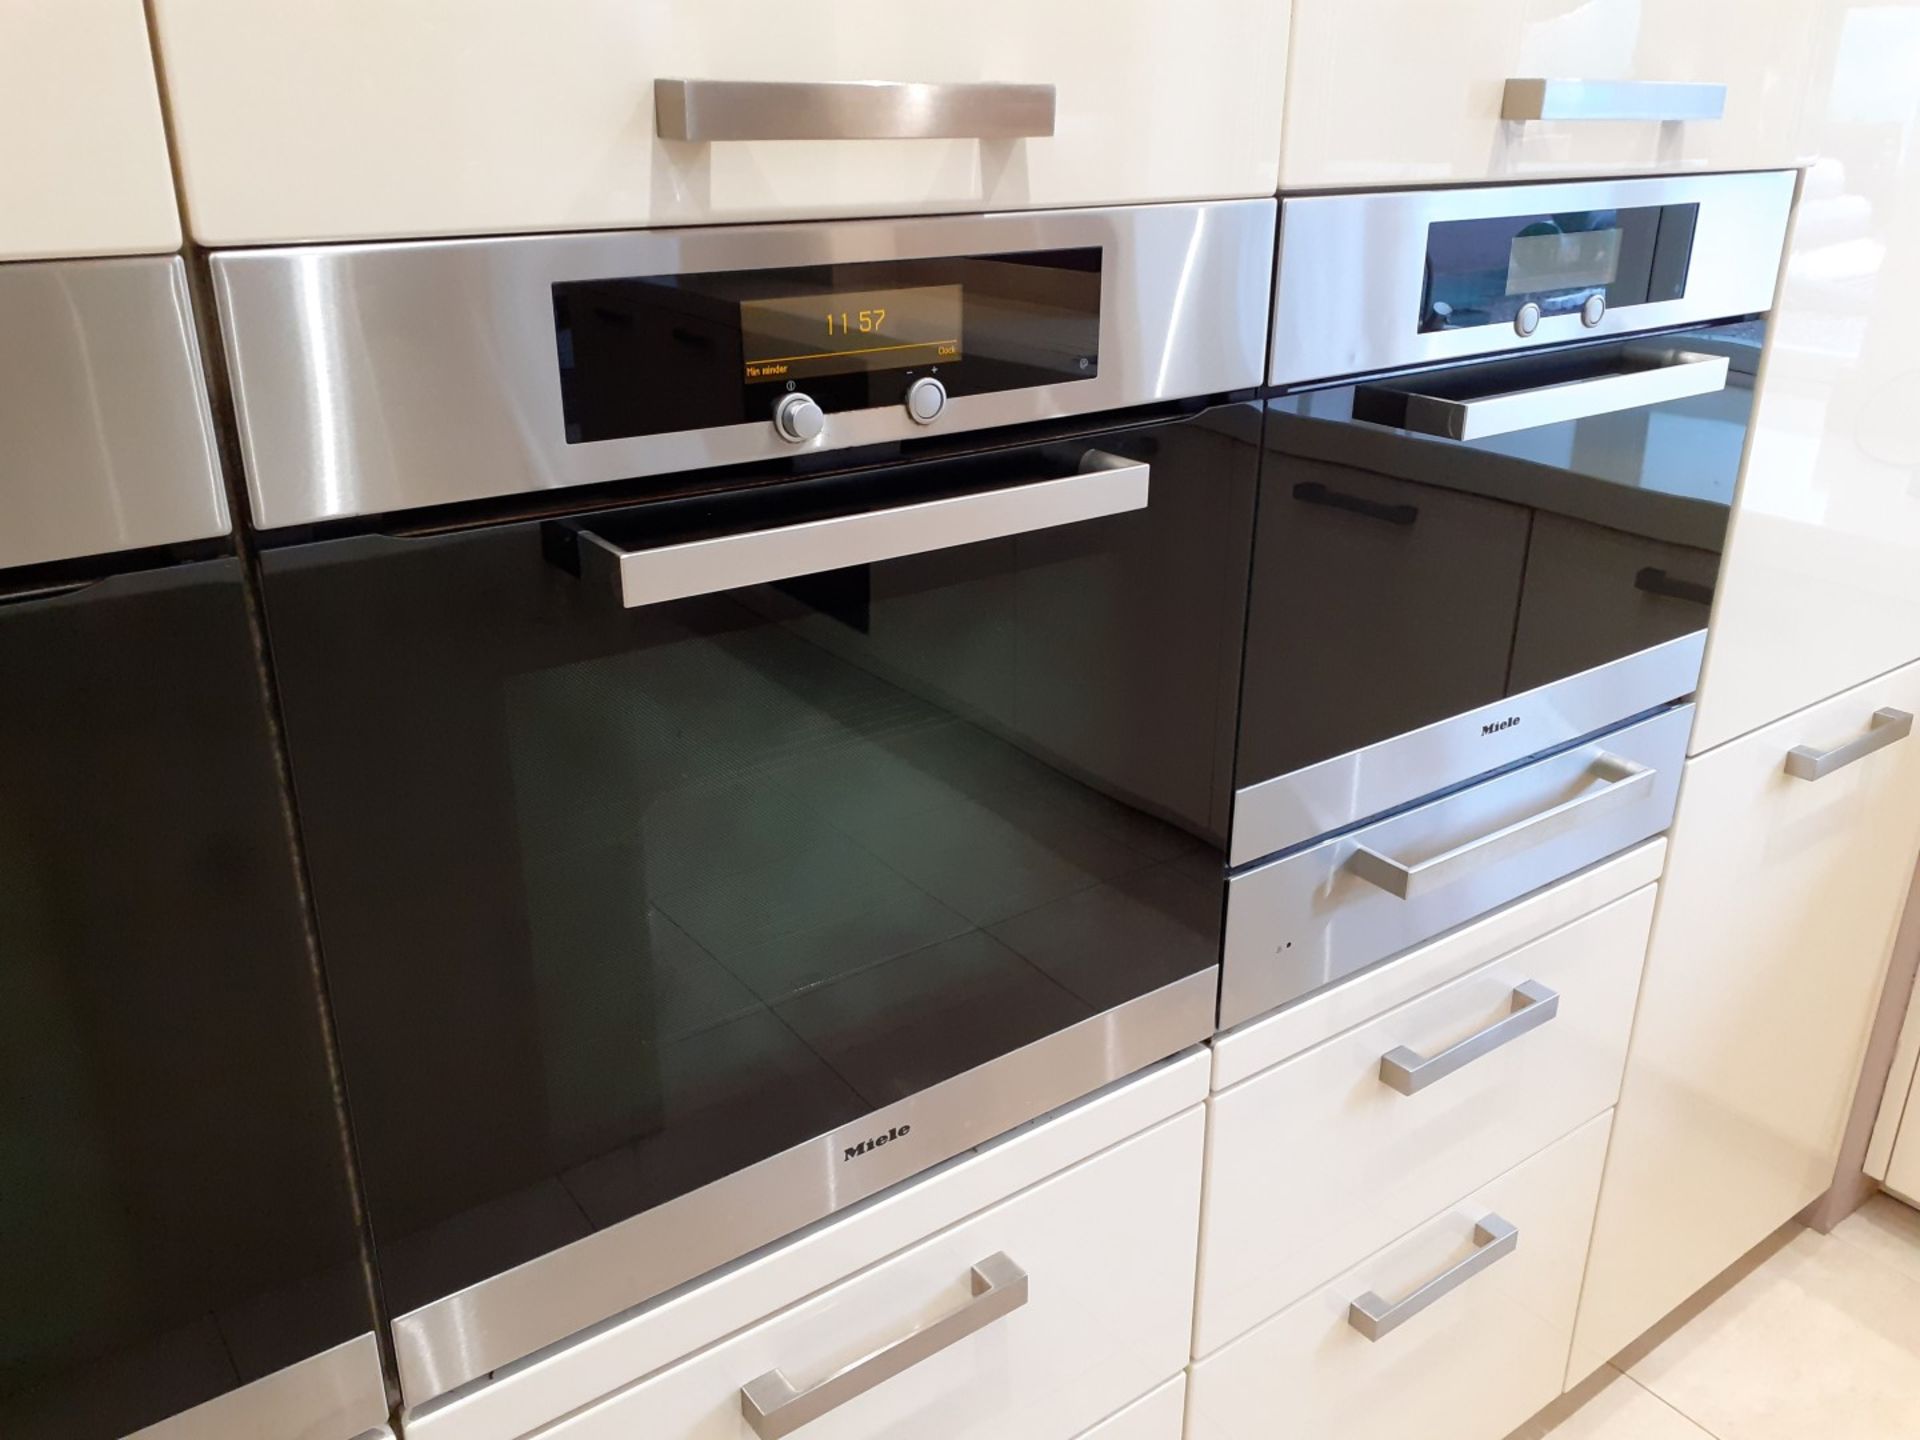 1 x ALNO Fitted Kitchen With Integrated Miele Appliances, Silestone Worktops & Breakfast Island - Image 63 of 77